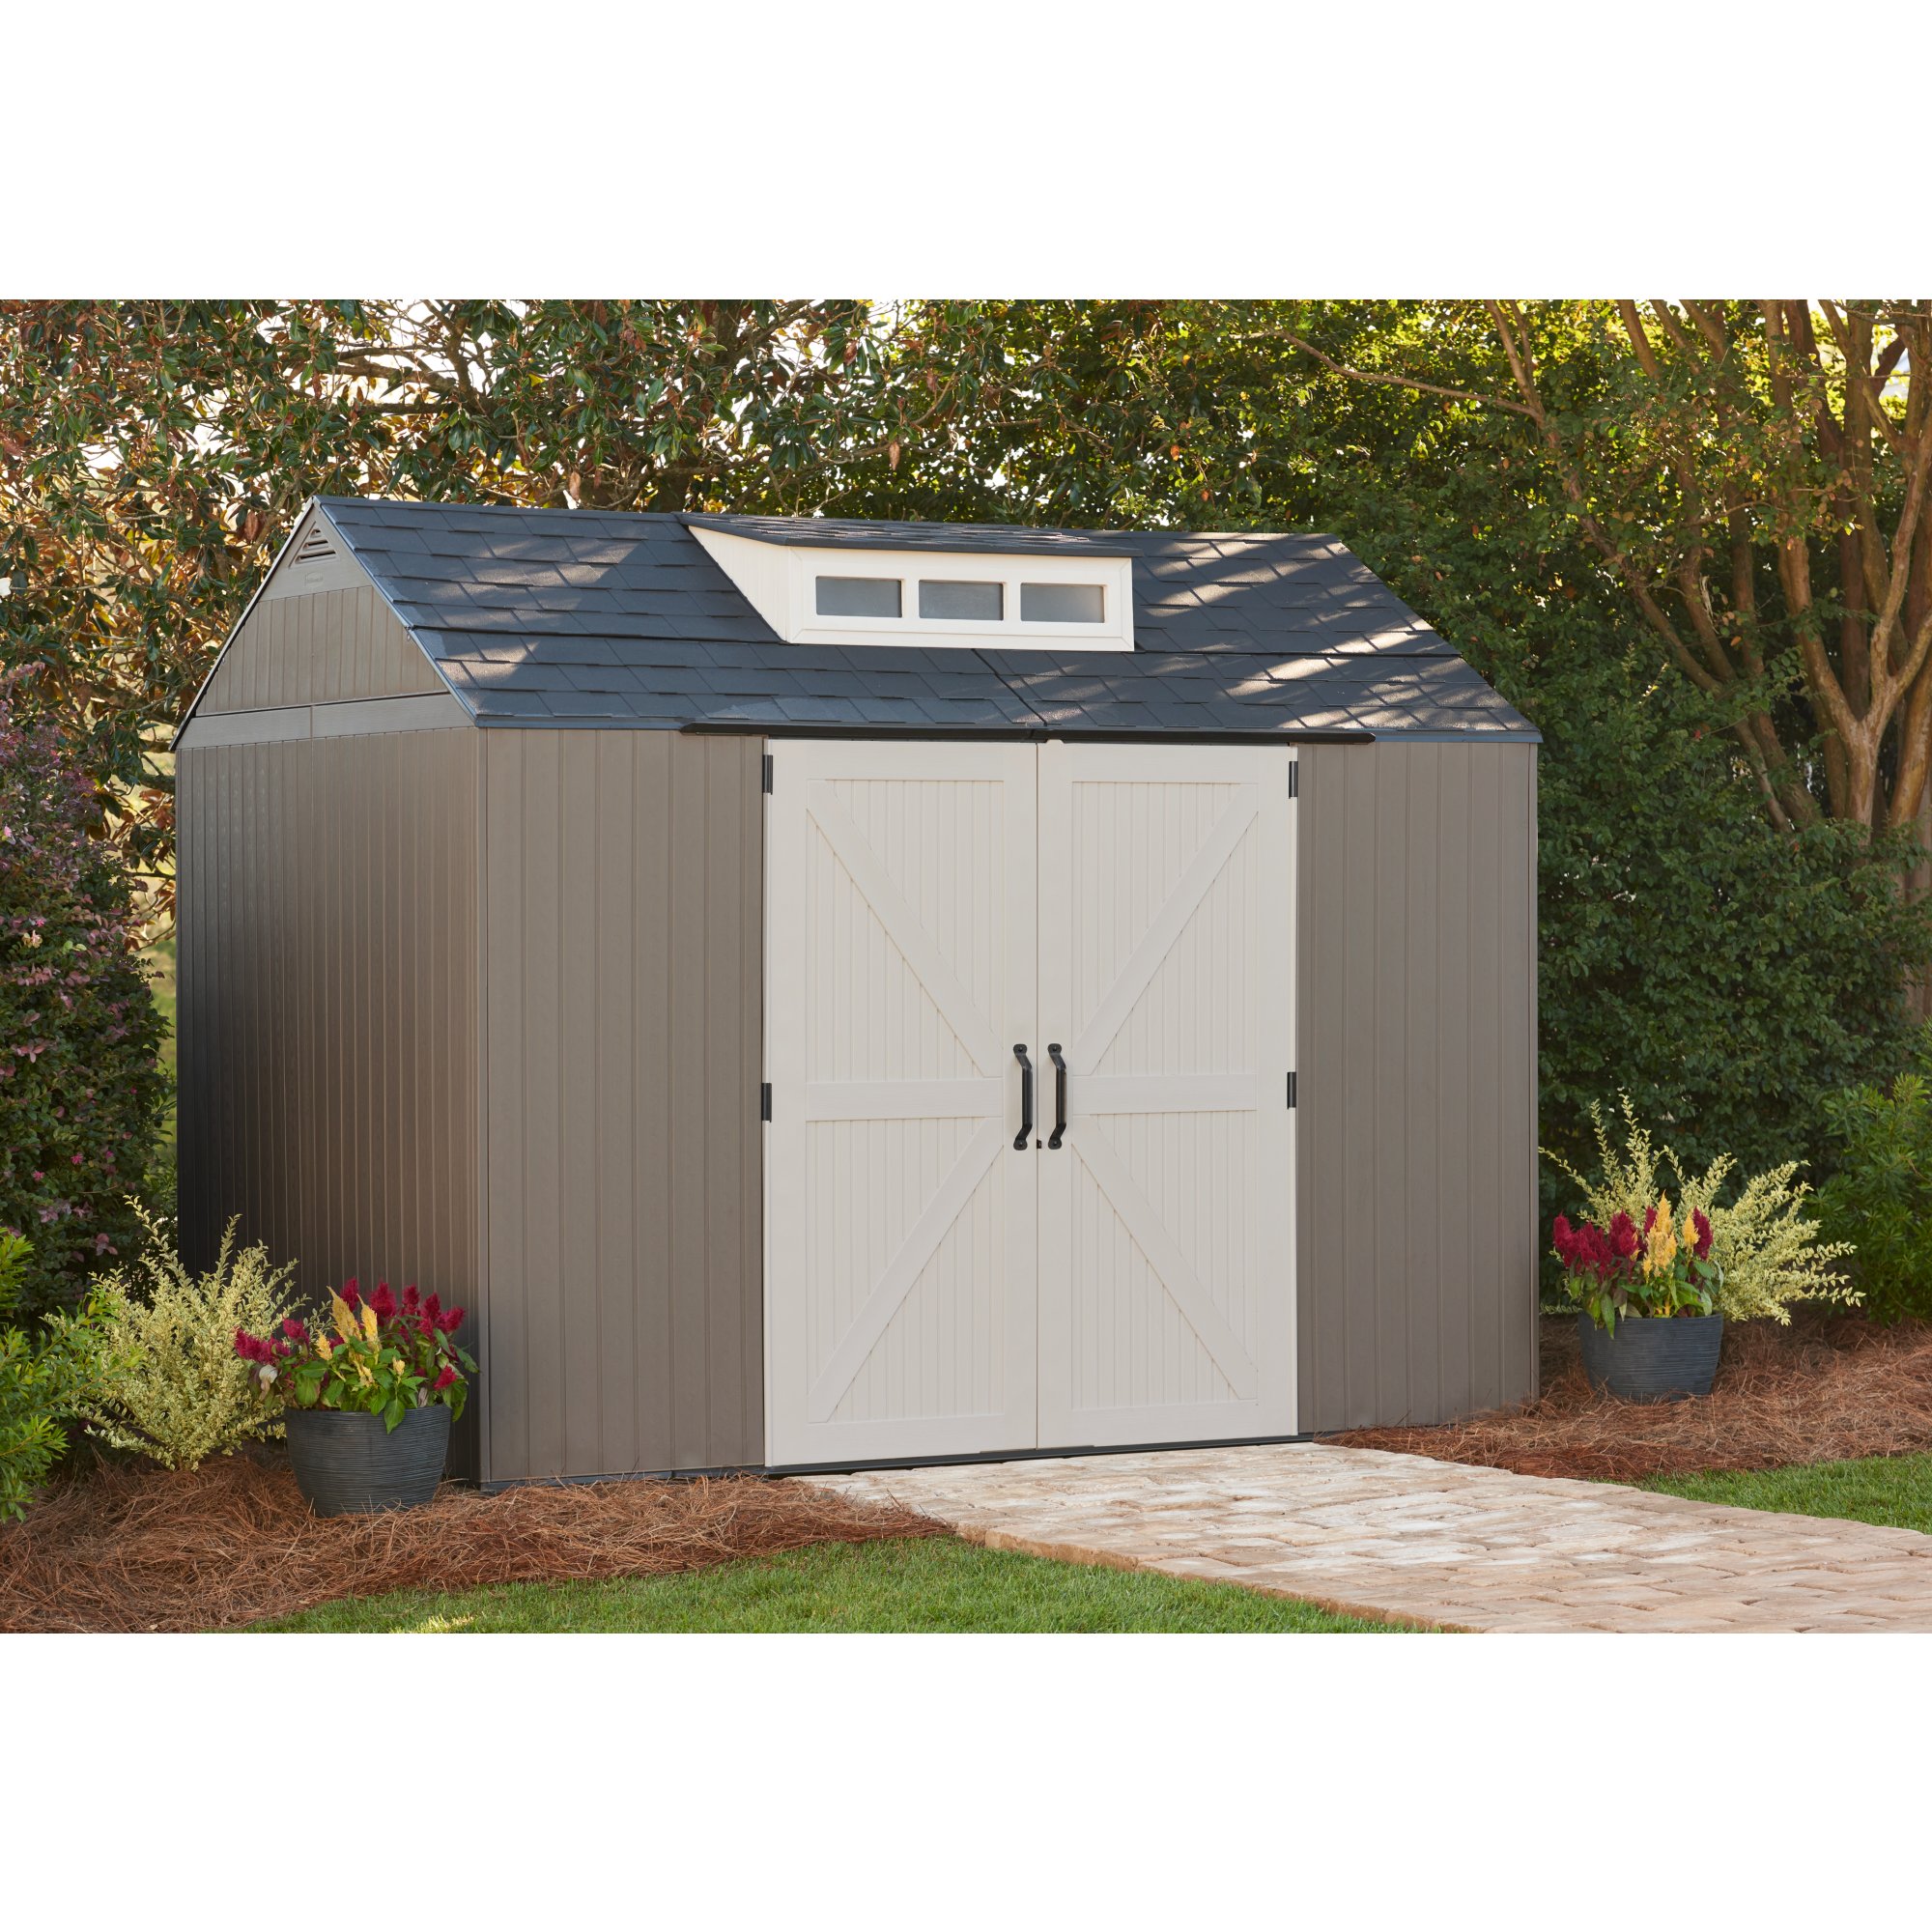 Rubbermaid Home Products Rubbermaid Sheds and Accessories - The